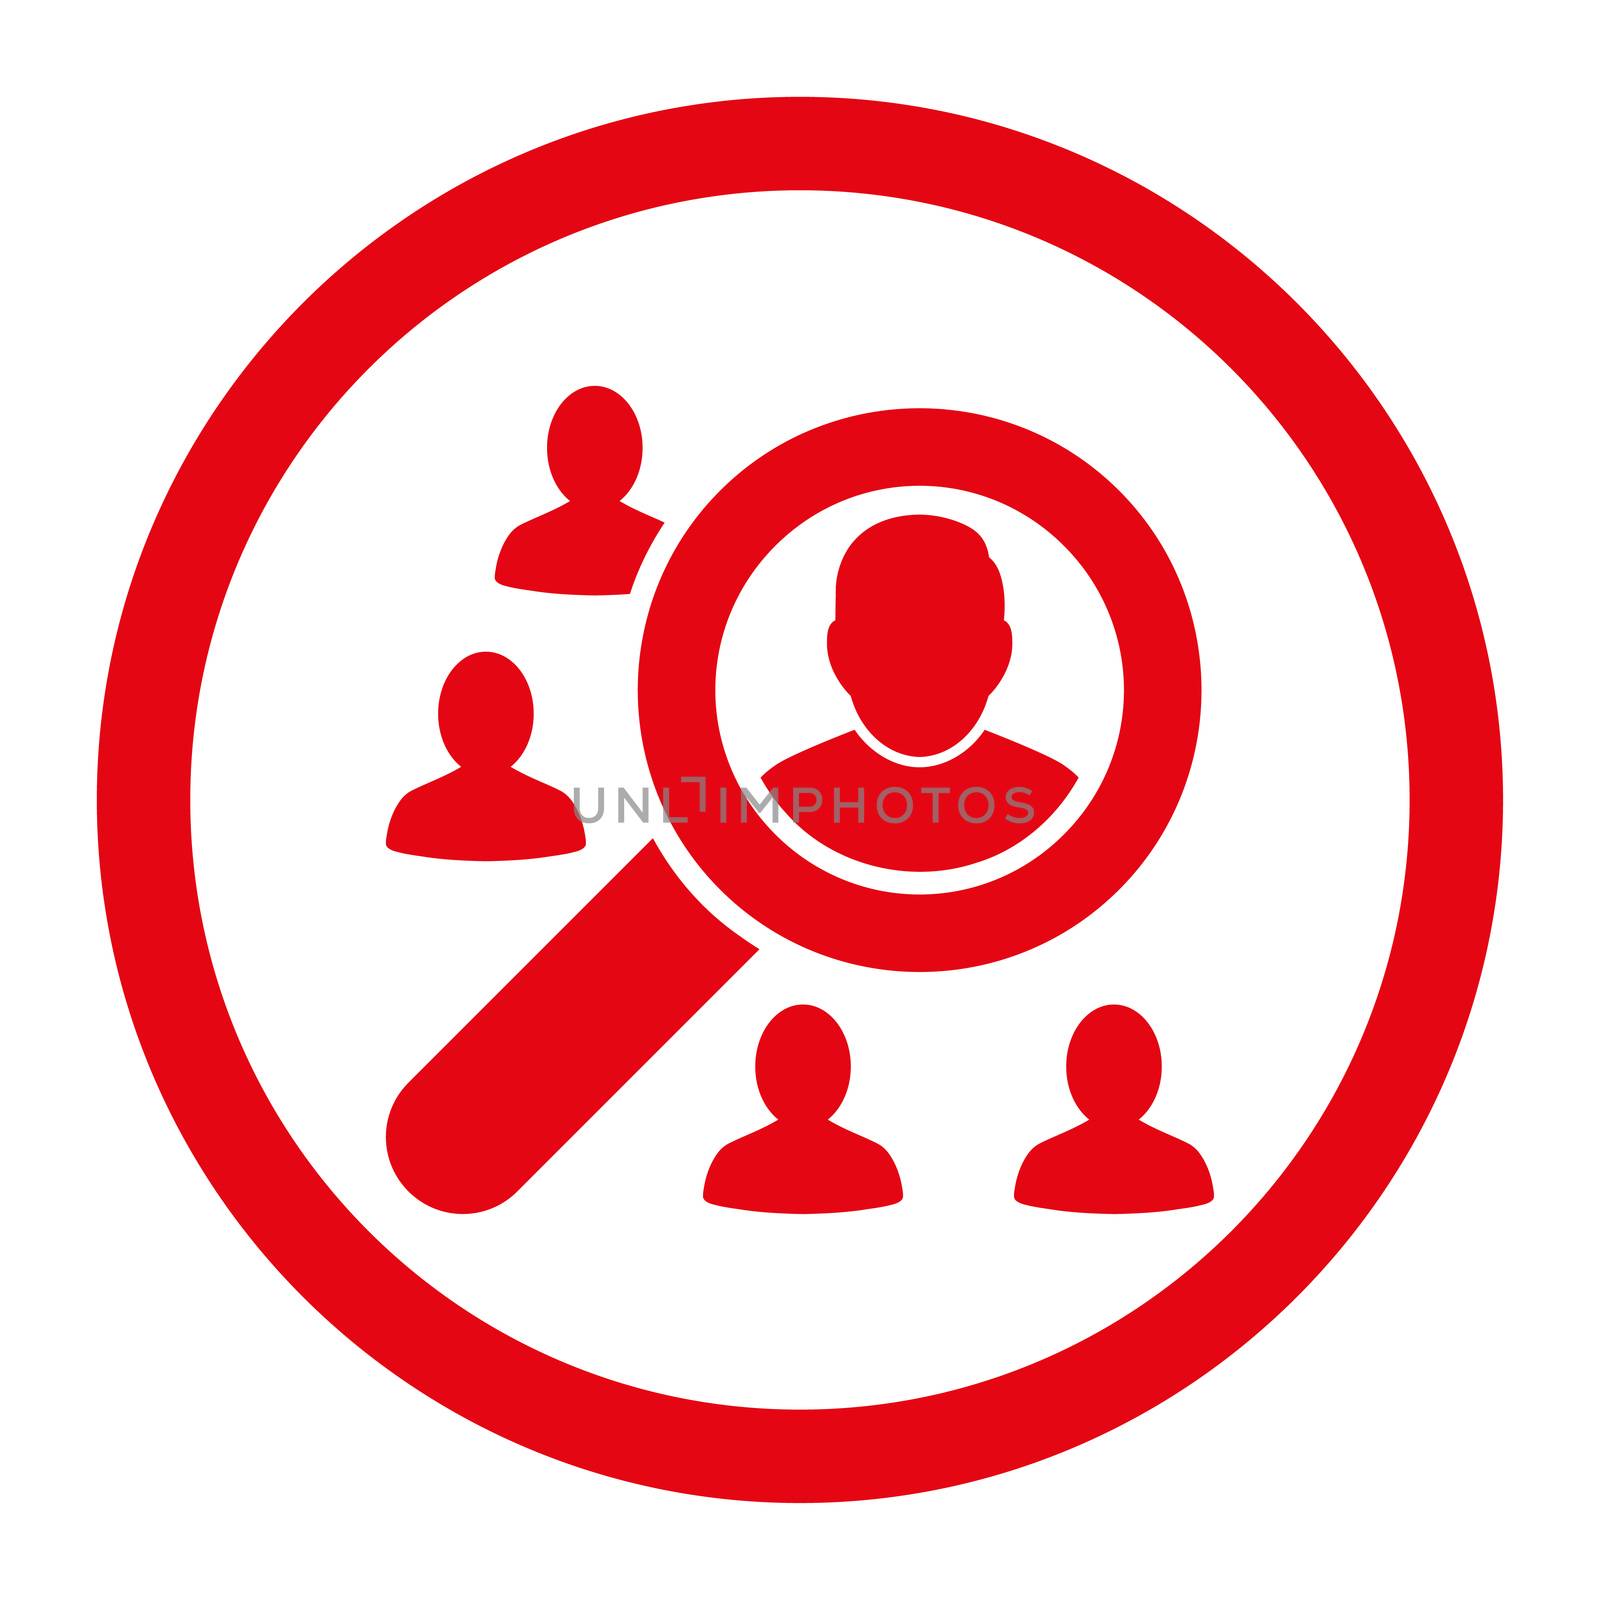 Marketing glyph icon. This rounded flat symbol is drawn with red color on a white background.